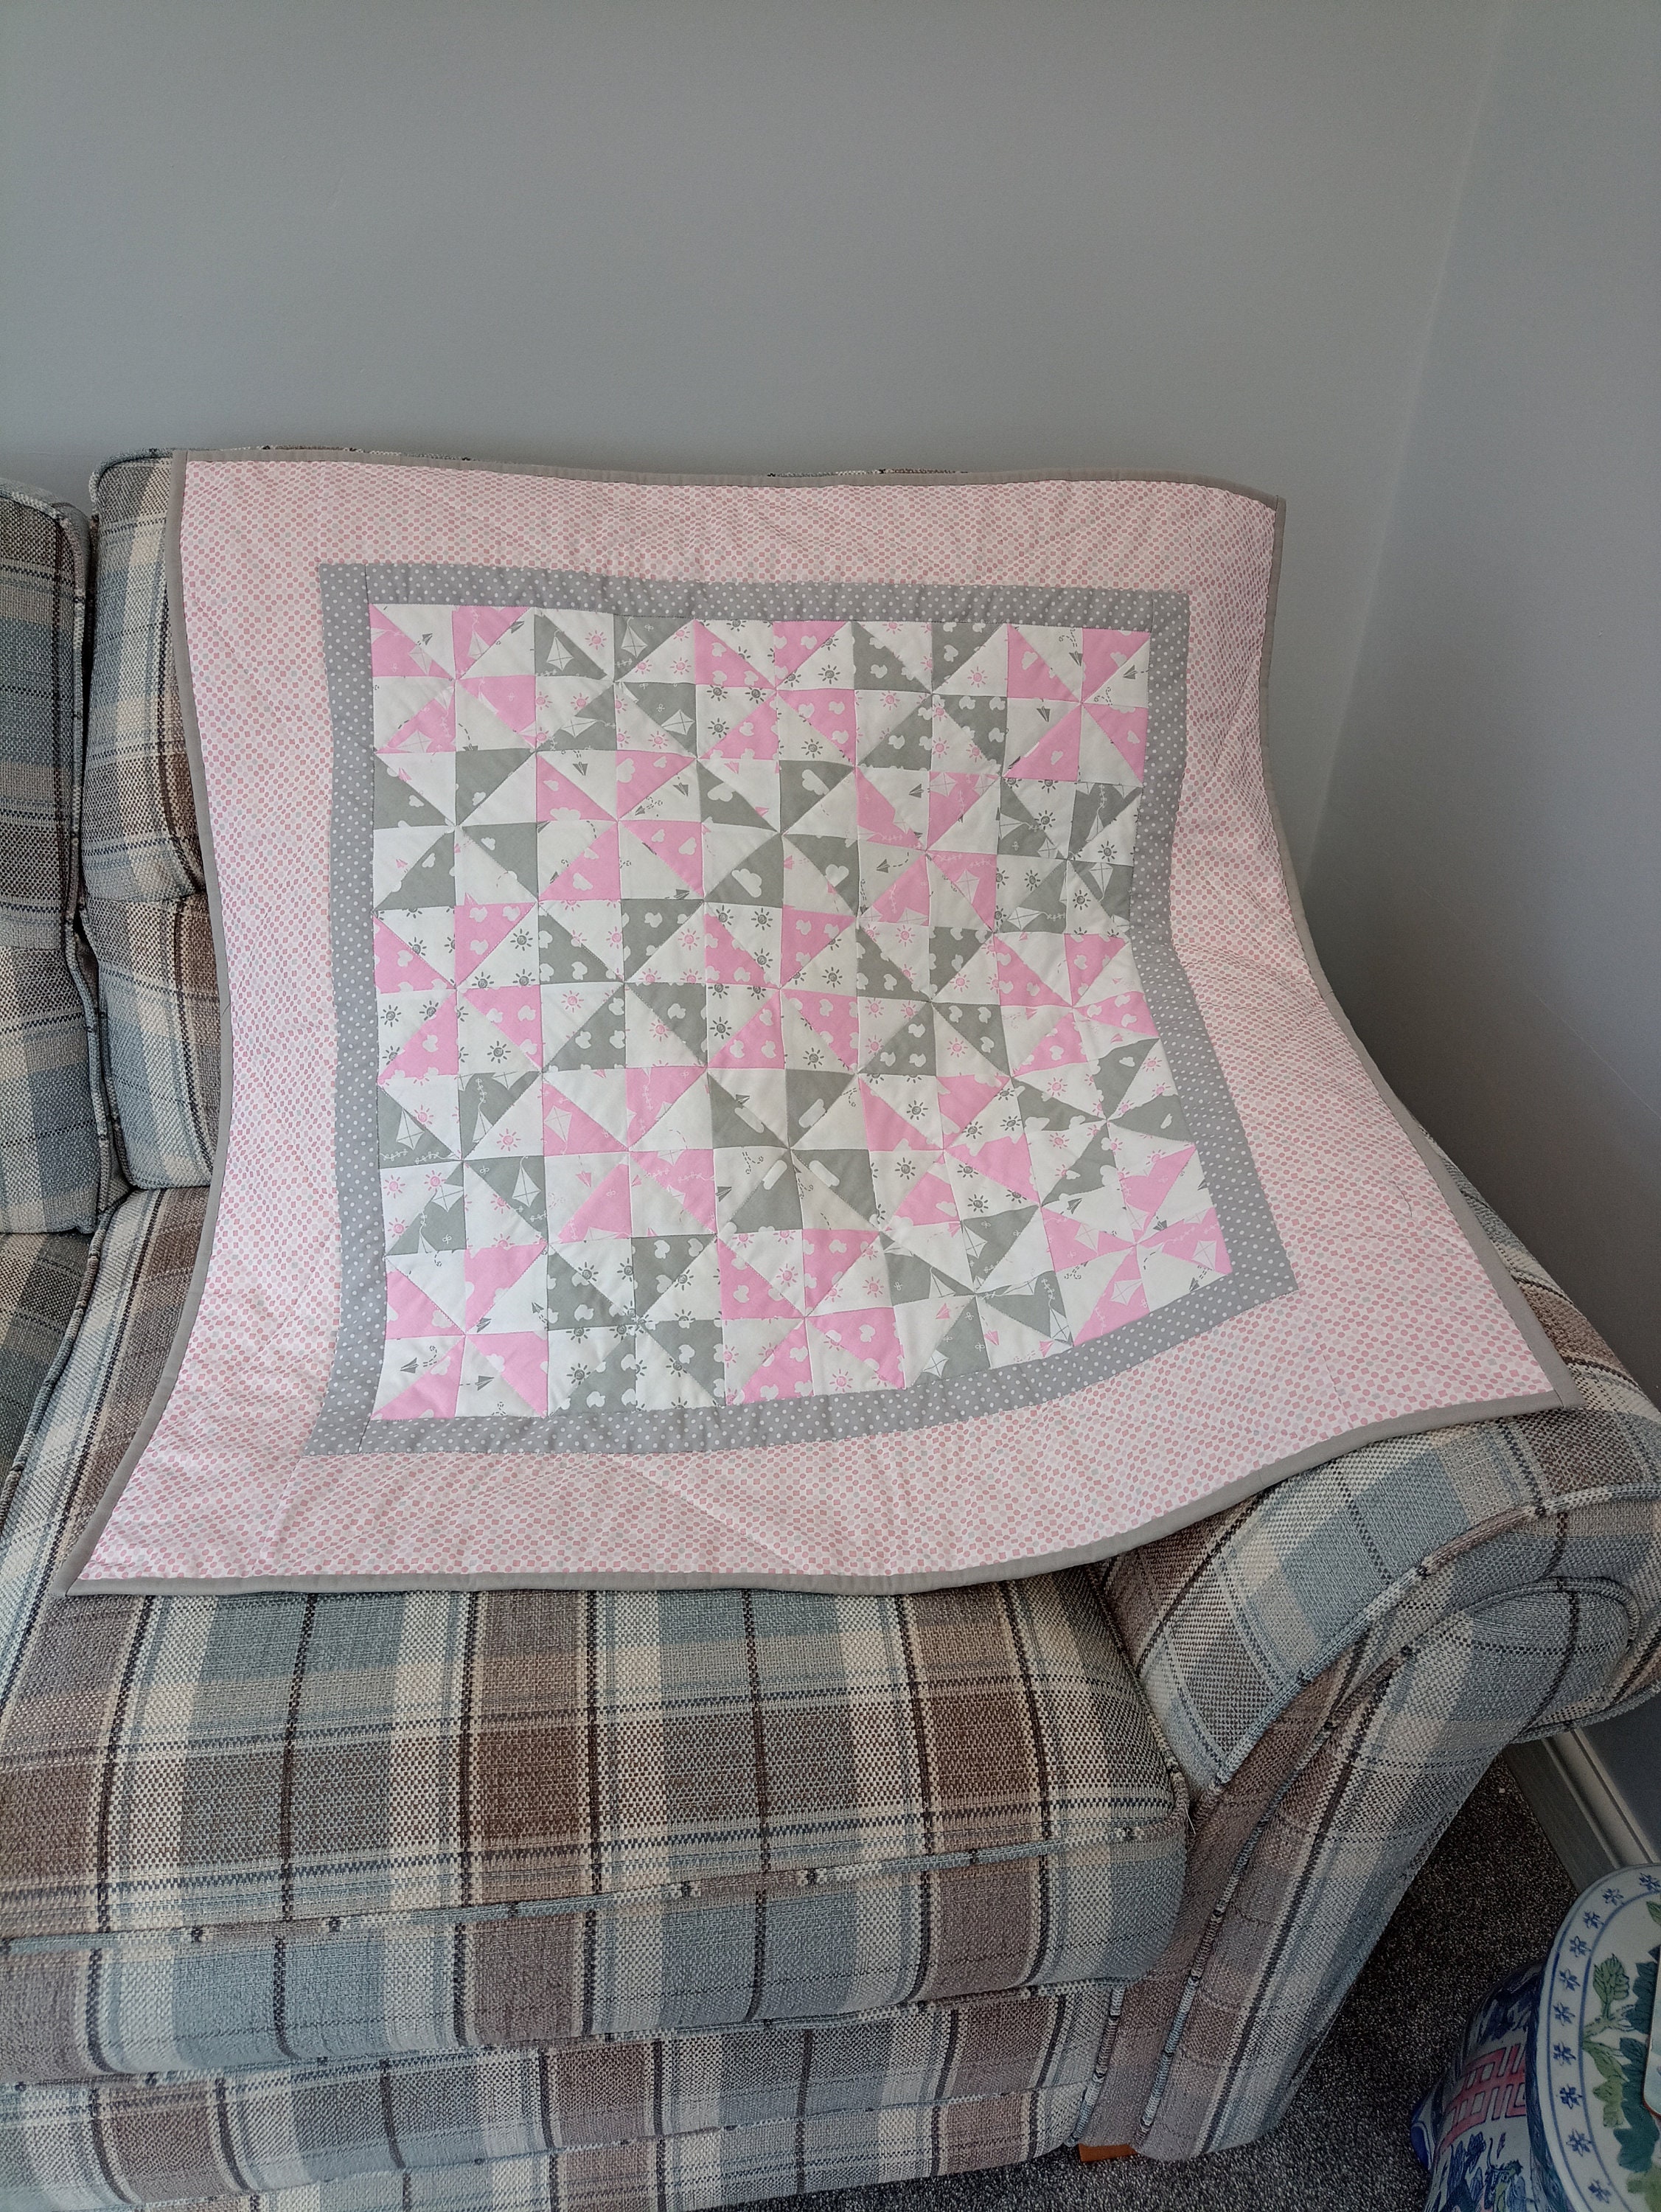 Baby Girl Quilt Kit From Quiltiesisters. Pre-cut Ready for You to Start  Sewing 